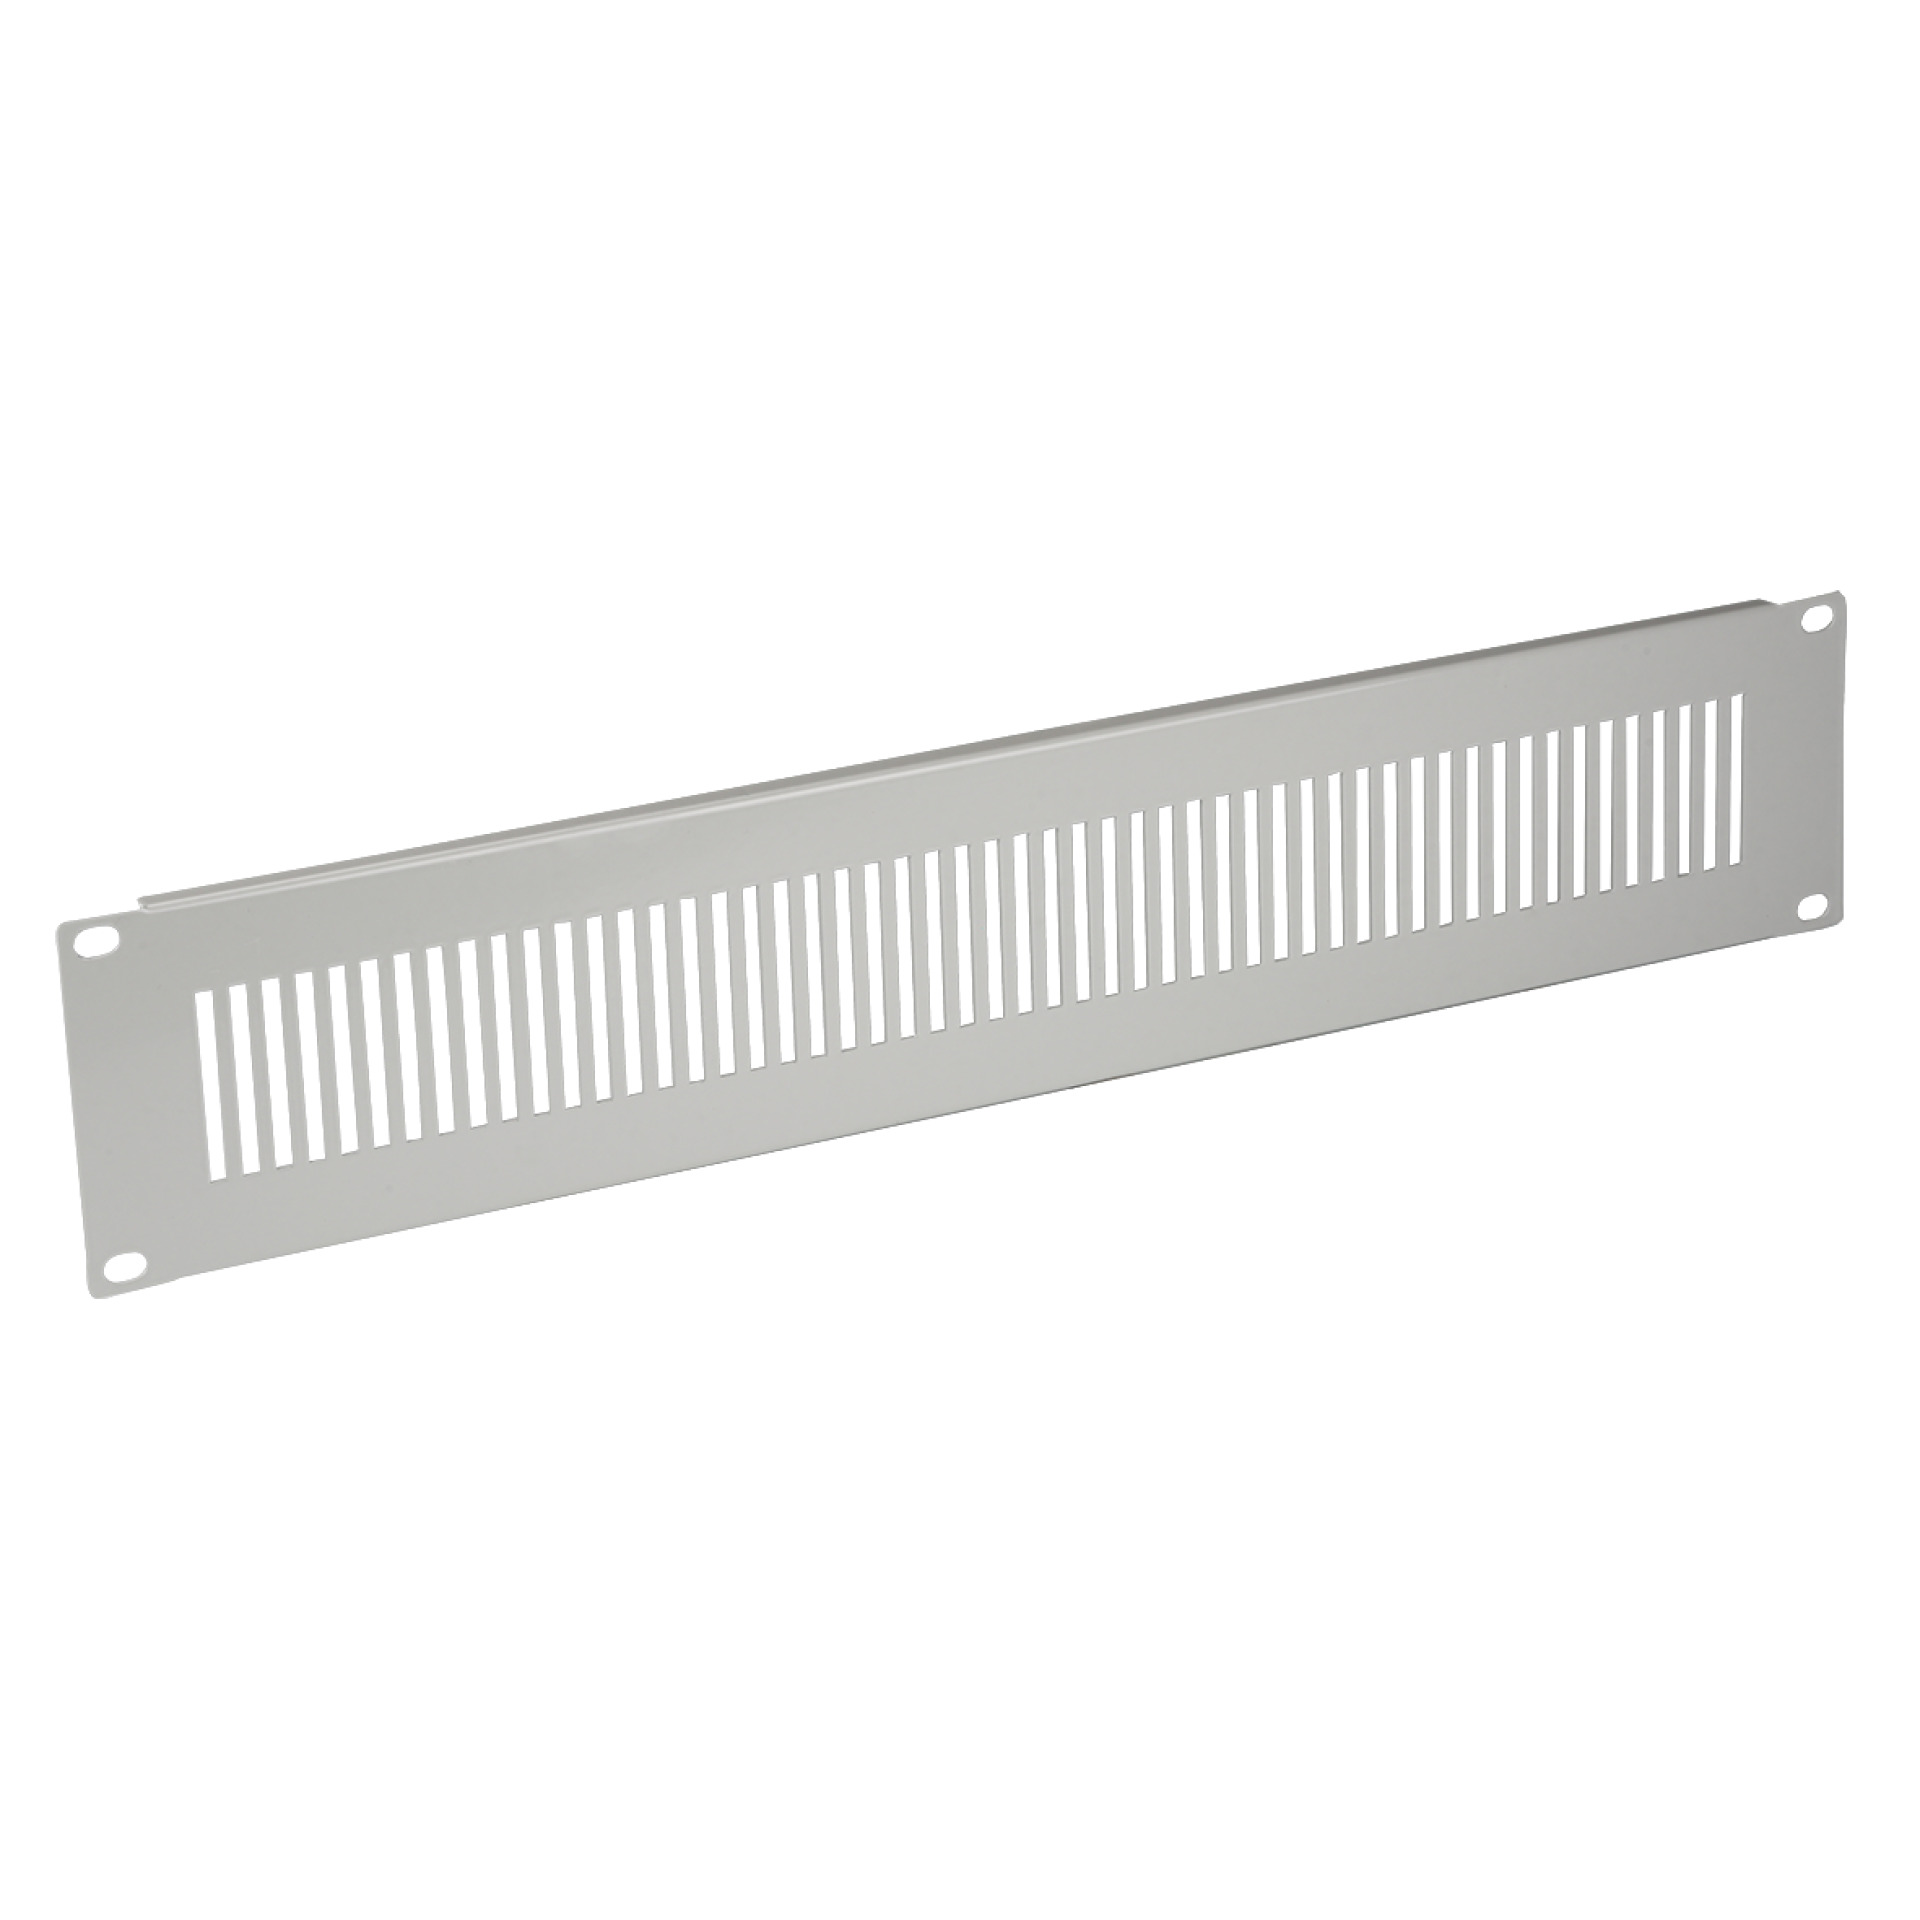 19" 2U Dummy Plate, Perforated, RAL9005